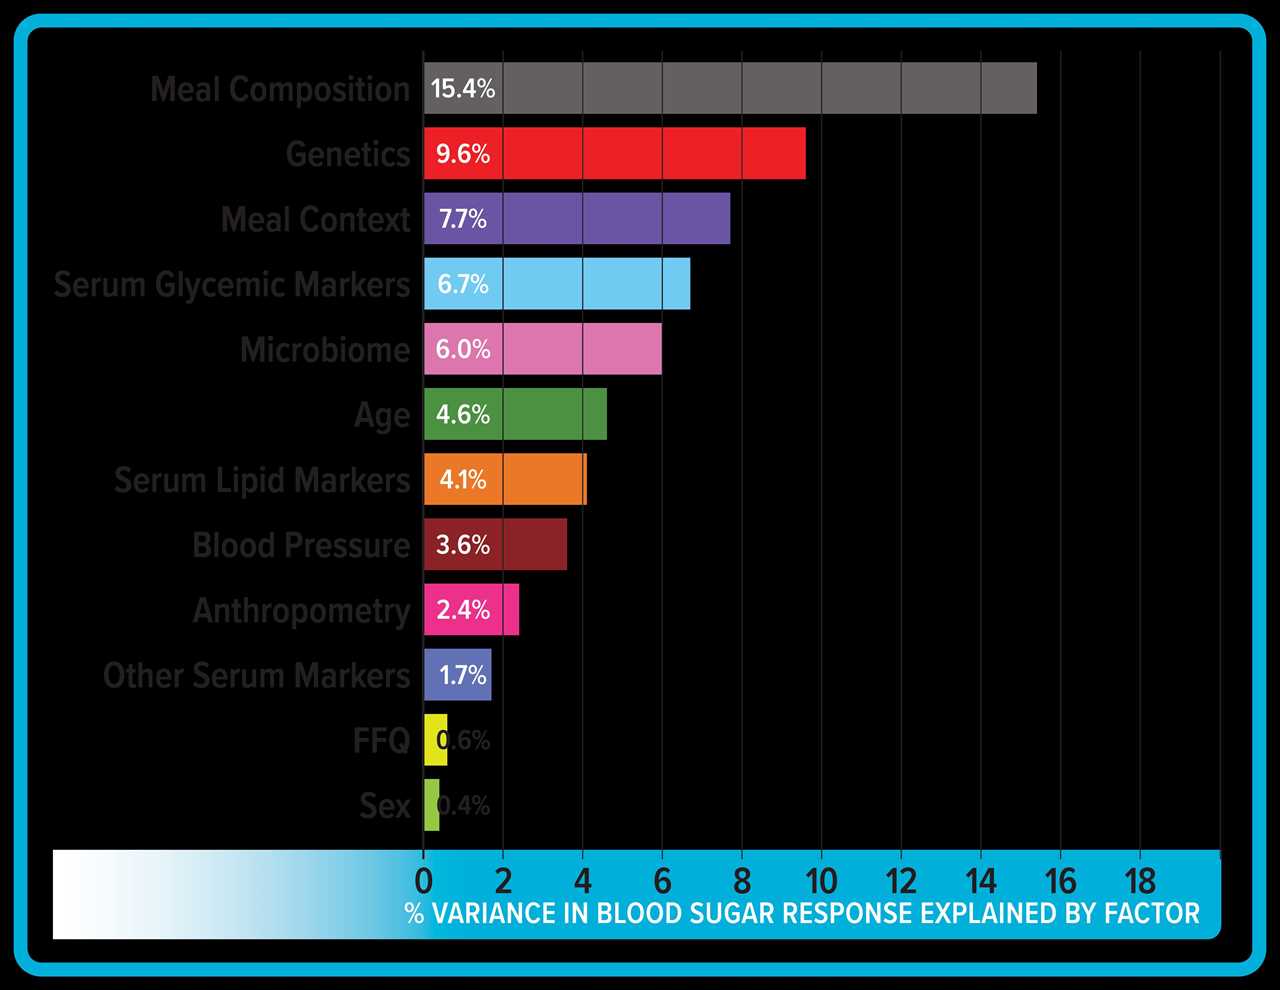 A chart shows several factors that affect blood sugar response. From the top, the factors read (in order of how much they impact glucose response): Meal composition (15.4%), genetics (9.6%), meal context (7.7%), serum glycemic markers (6.7%), microbiome (6.0%), age (4.6%), serum lipid markers (4.1%), blood pressure (3.6%), anthropometry (2.4%), other serum markers (1.7%), FFQ [food frequency questionnaire, which helps measure the affect a person’s habitual diet] (0.6%), sex (0.4%). (Note: Continuous glucose monitors allow you to see how anything from an individual food to a full meal affects your blog sugar in real time.)